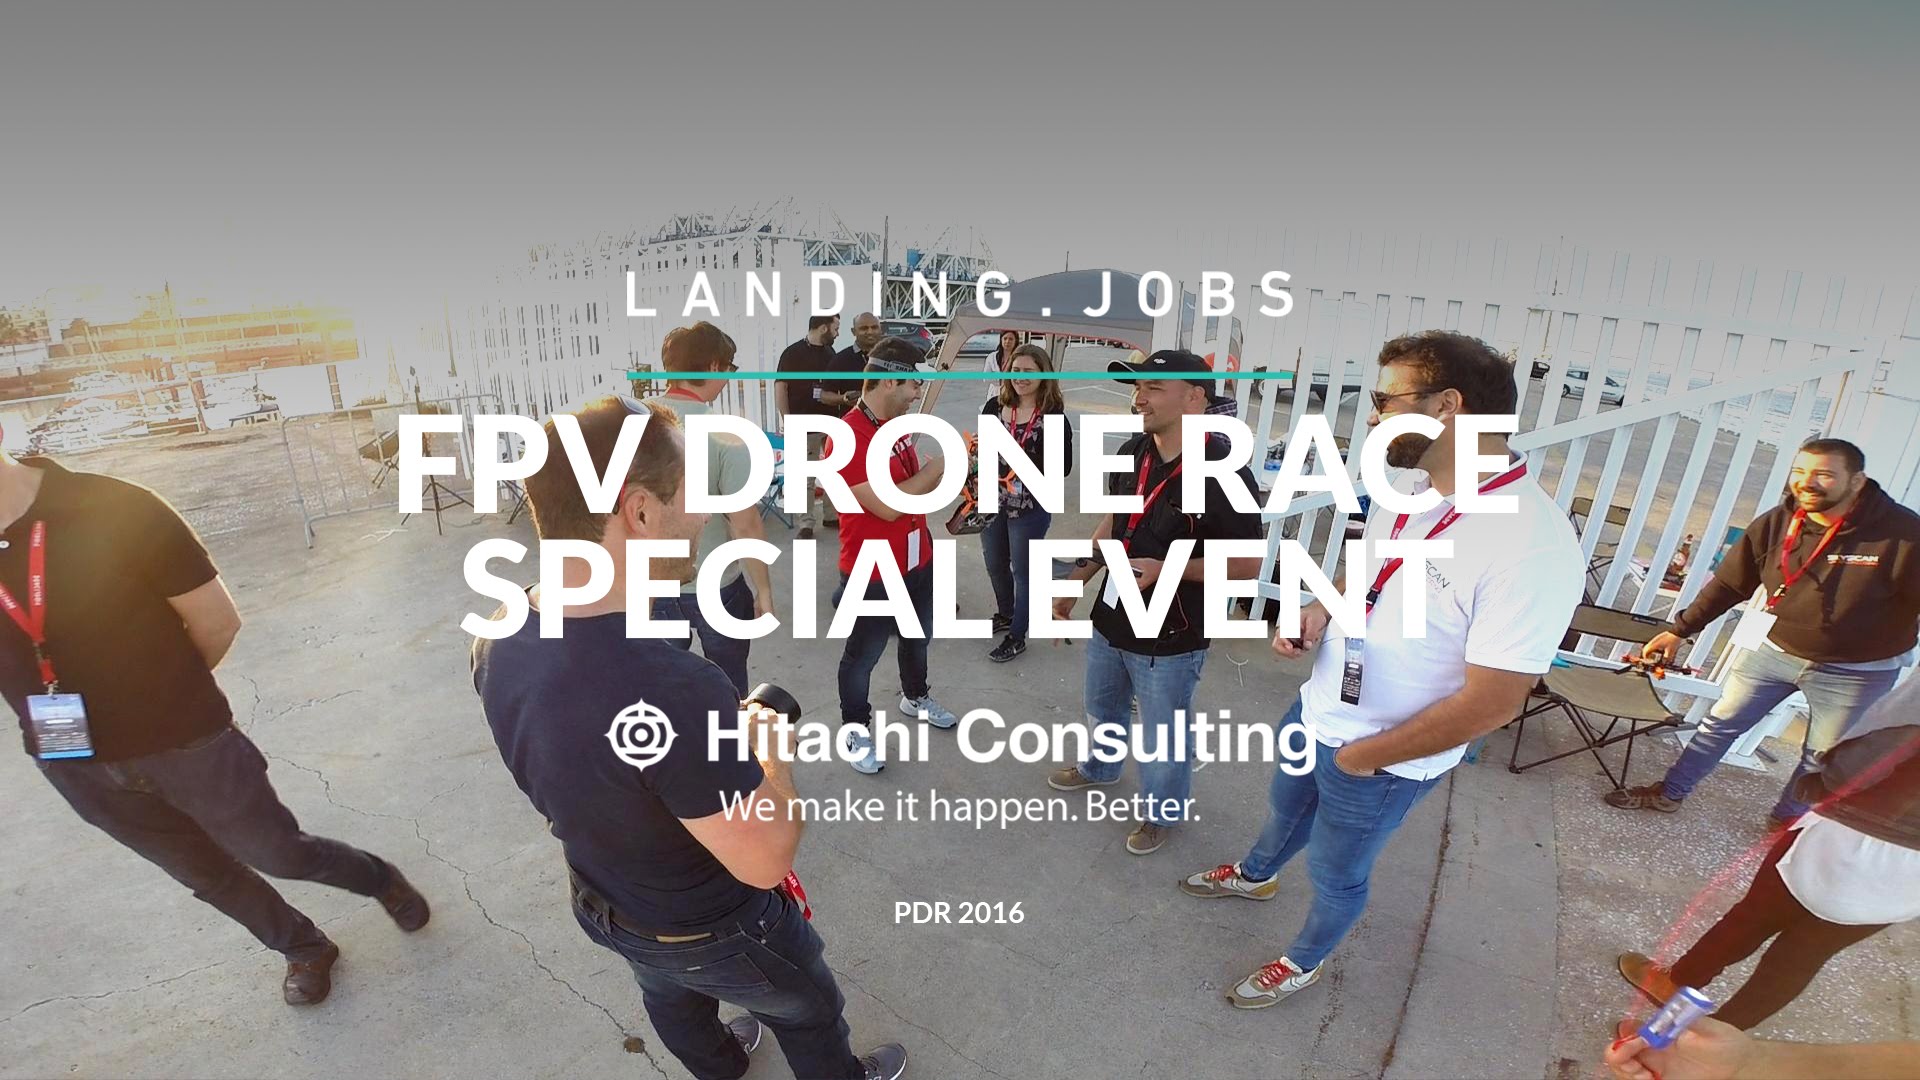 Landing.Jobs FPV Drone Race Special Event 2016